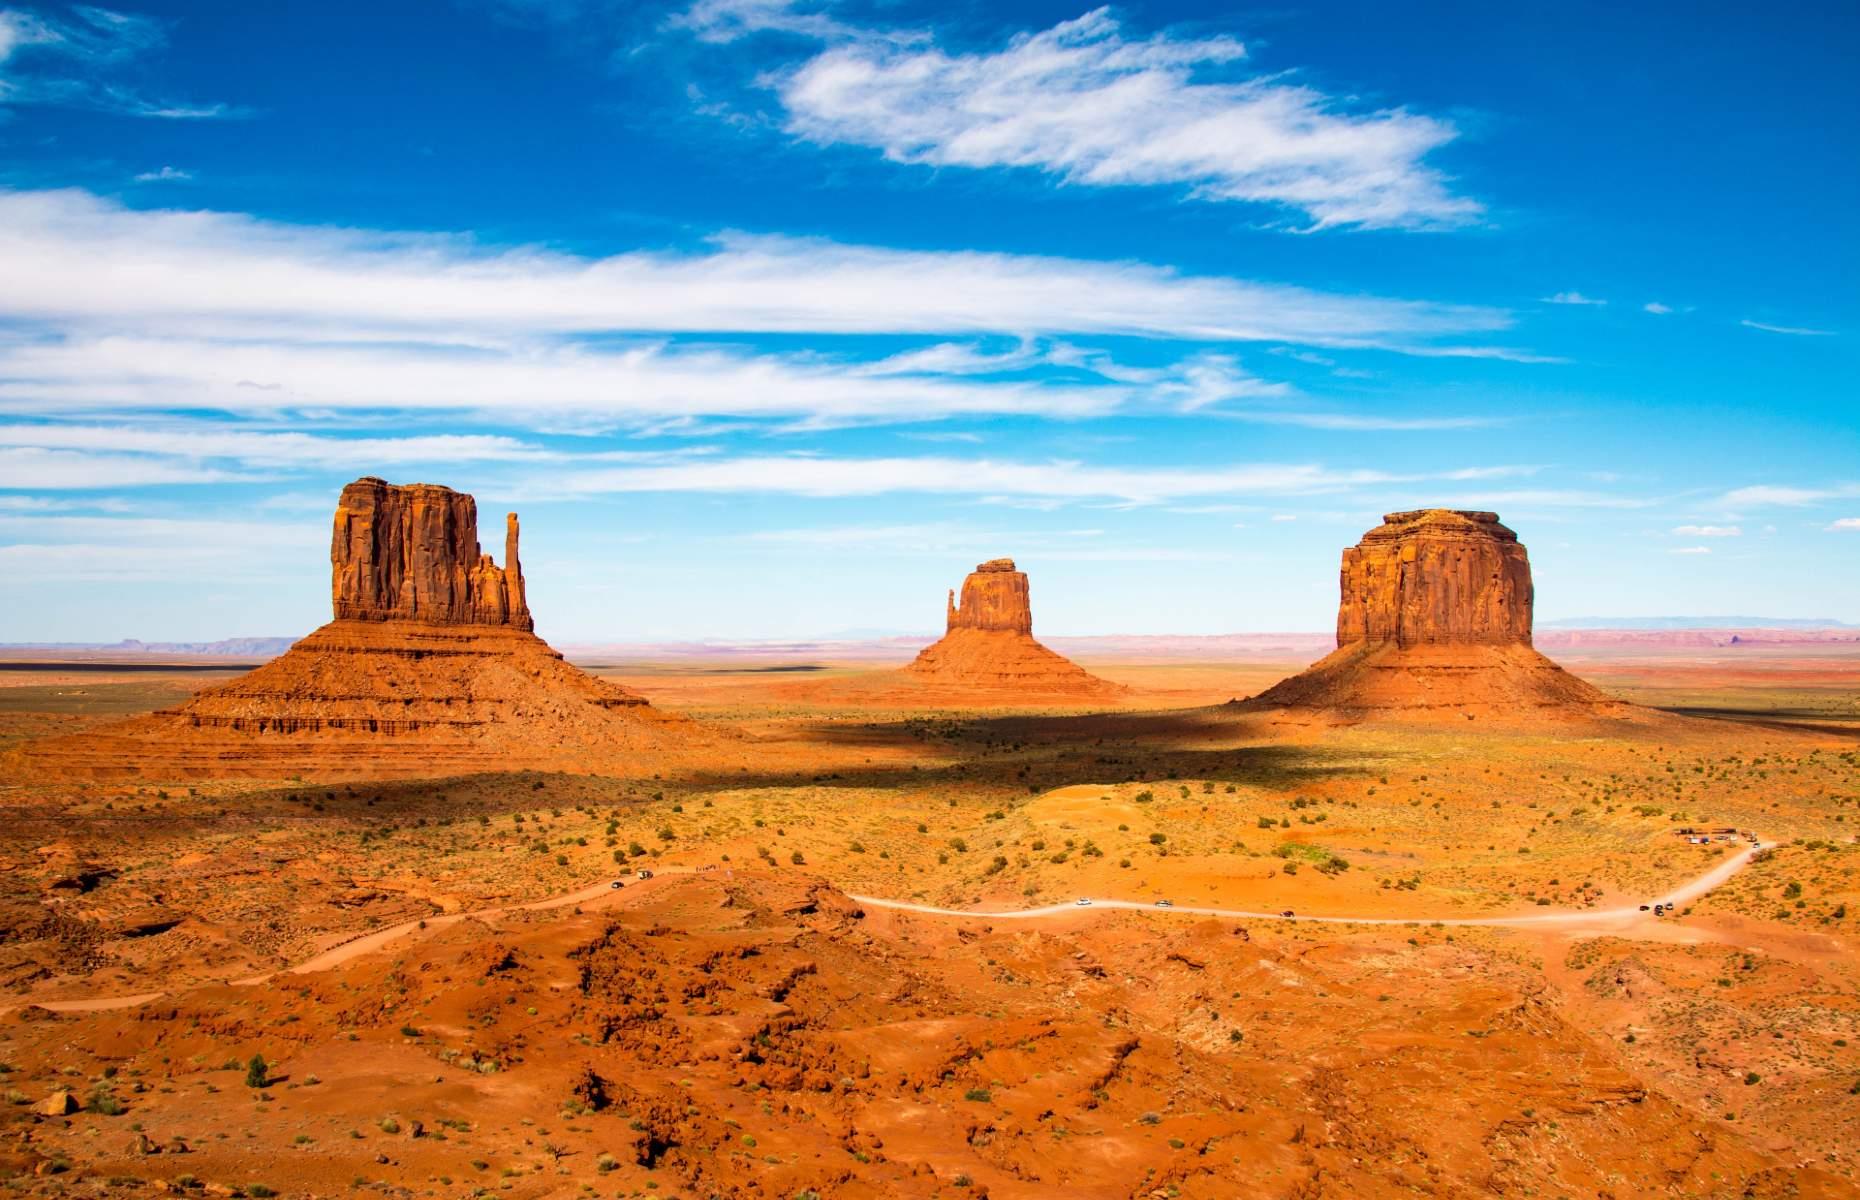 <p>With its sandstone buttes towering up to 1,000 feet (305m) above the valley floor, Monument Valley is unbelievably beautiful. The otherworldly landscape, which actually sits on the Utah-Arizona state border, is part of the <a href="https://navajonationparks.org/tribal-parks/monument-valley/">Navajo Nation</a>, a 16 million-acre region which is home to around 250,000 members of the Navajo tribe. Today, visitors can enjoy guided tours from Navajo operators, sample traditional cuisine and peruse local crafts within easy reach of the park’s visitor center. You can even camp out here if you wish (although you’ll need to obtain a permit in advance). </p>  <p><a href="https://www.loveexploring.com/galleries/114695/what-to-see-in-americas-national-parks-free-national-park-days-2022?page=1"><strong>Discover all the things you can see in America's national parks for free</strong></a></p>